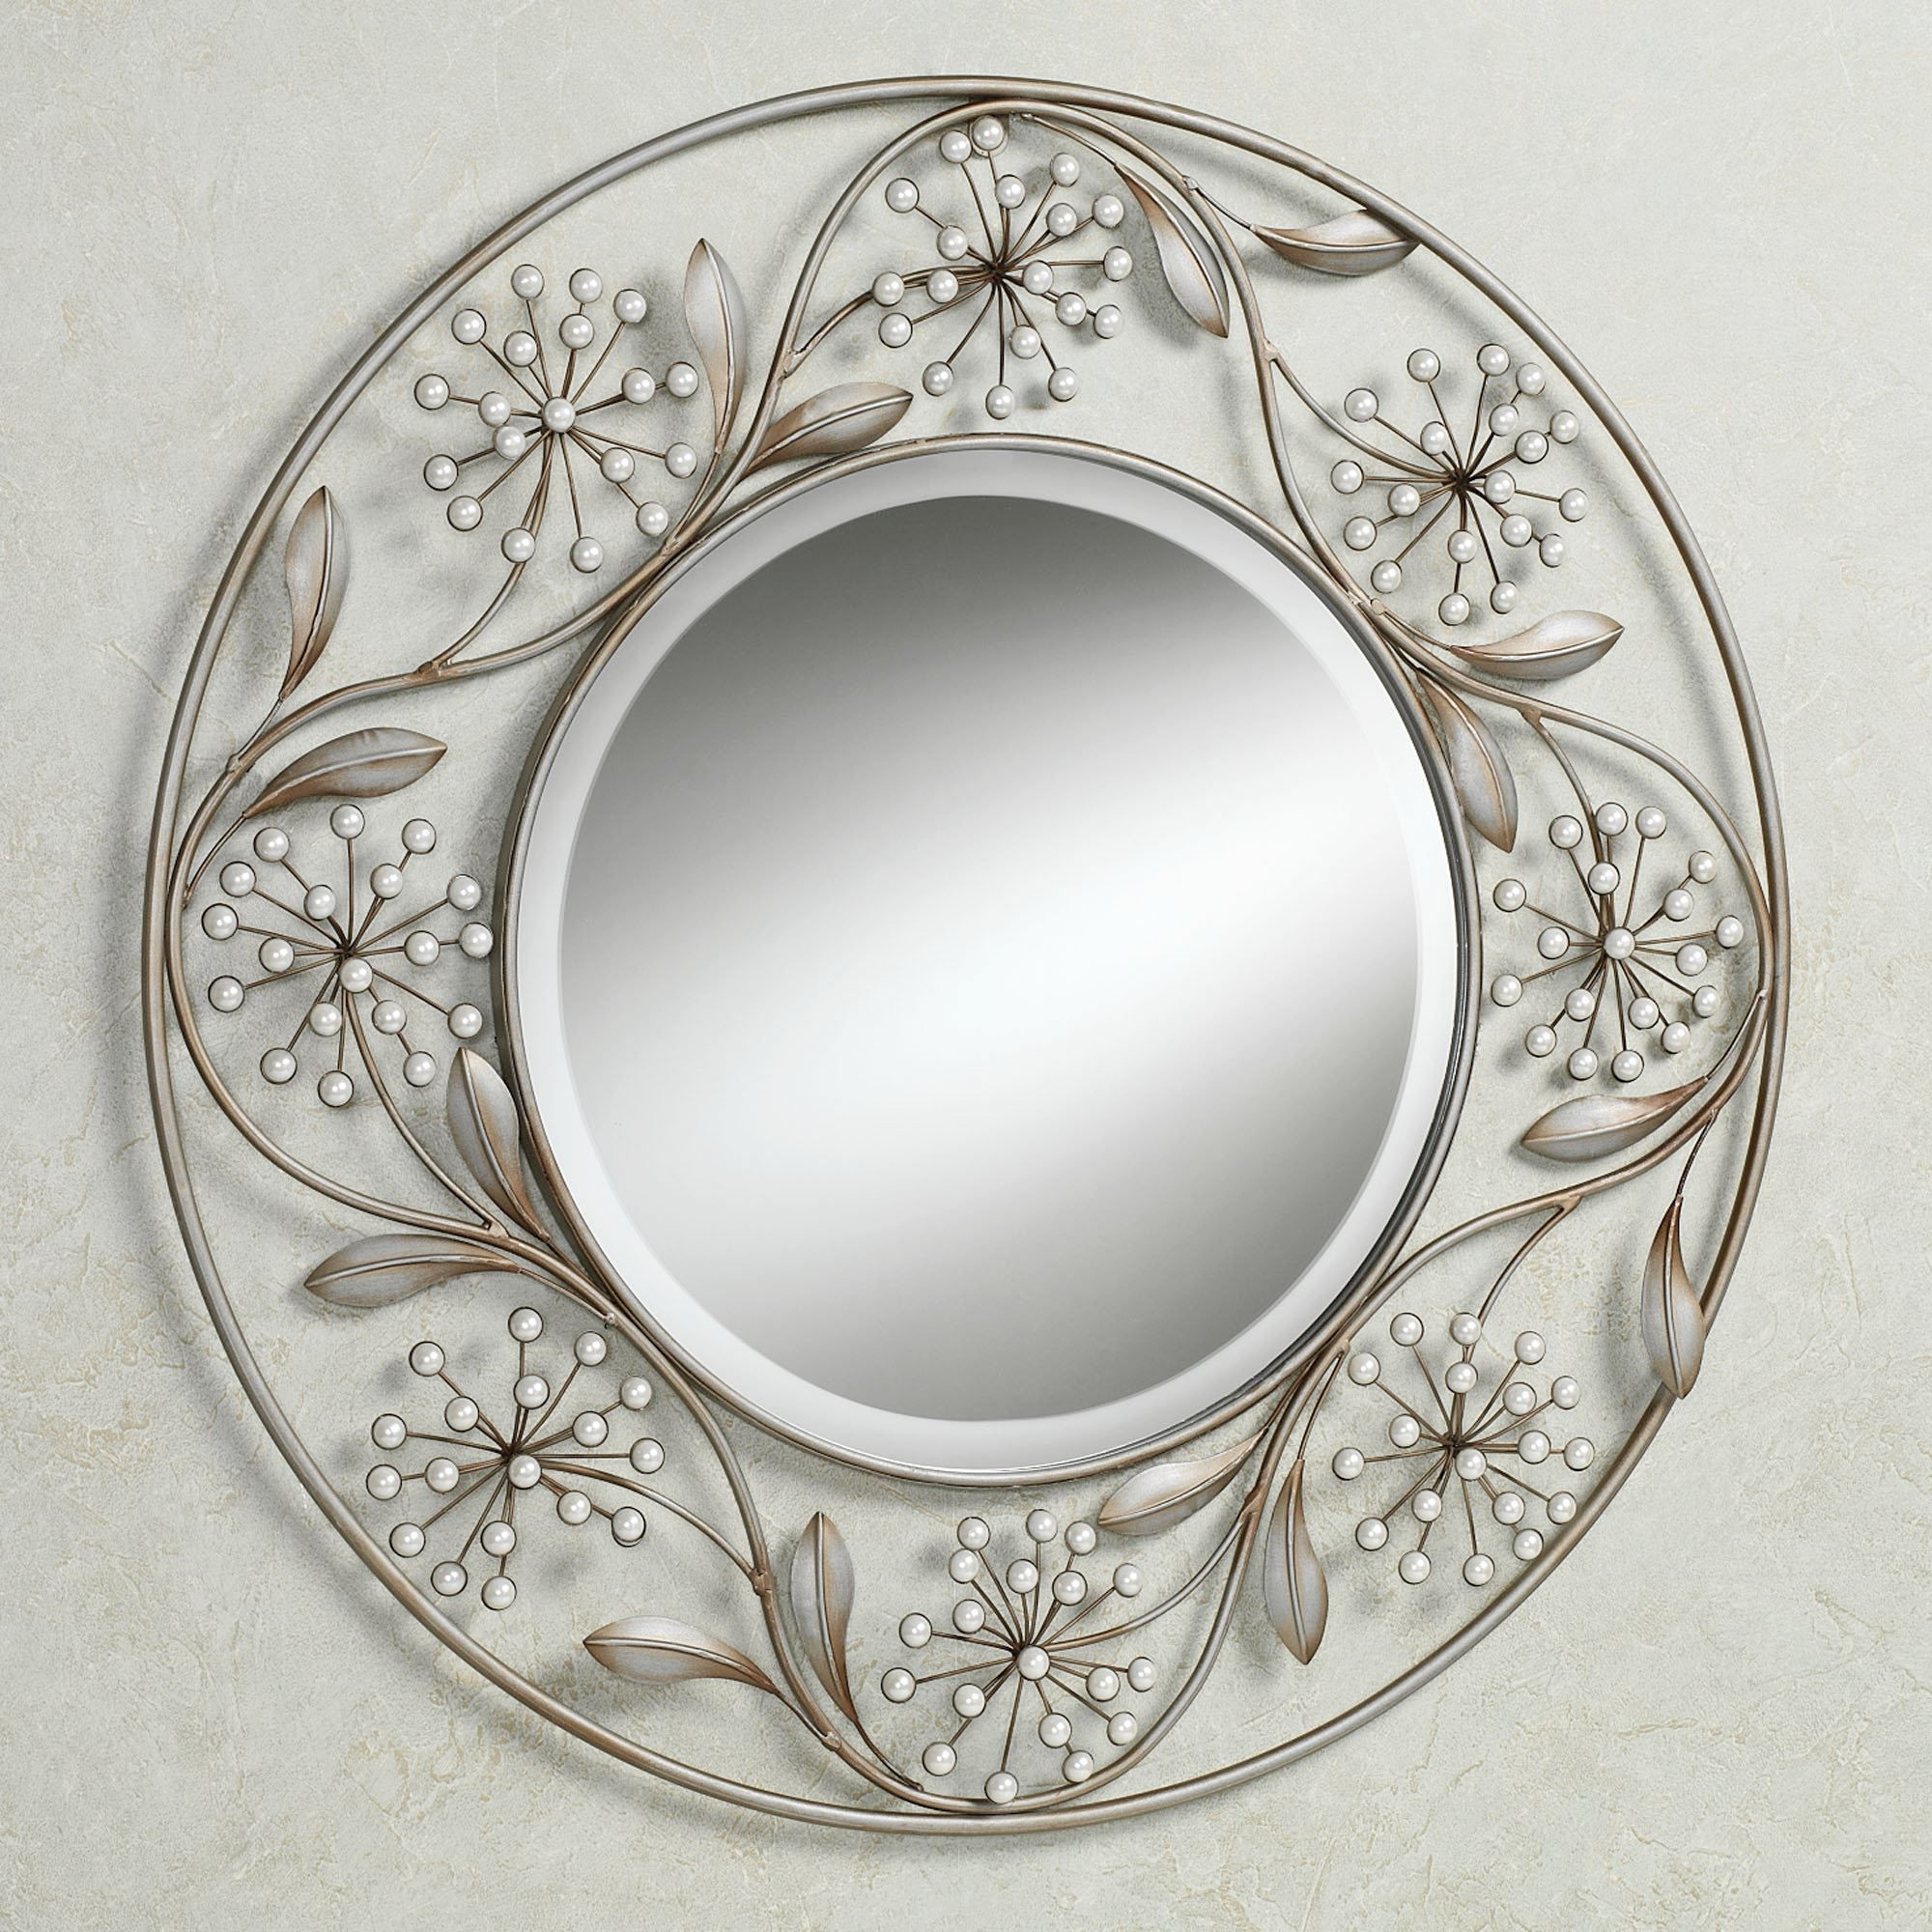 Pearlette Round Metal Wall Mirror Intended For Woven Metal Round Wall Mirrors (View 15 of 15)